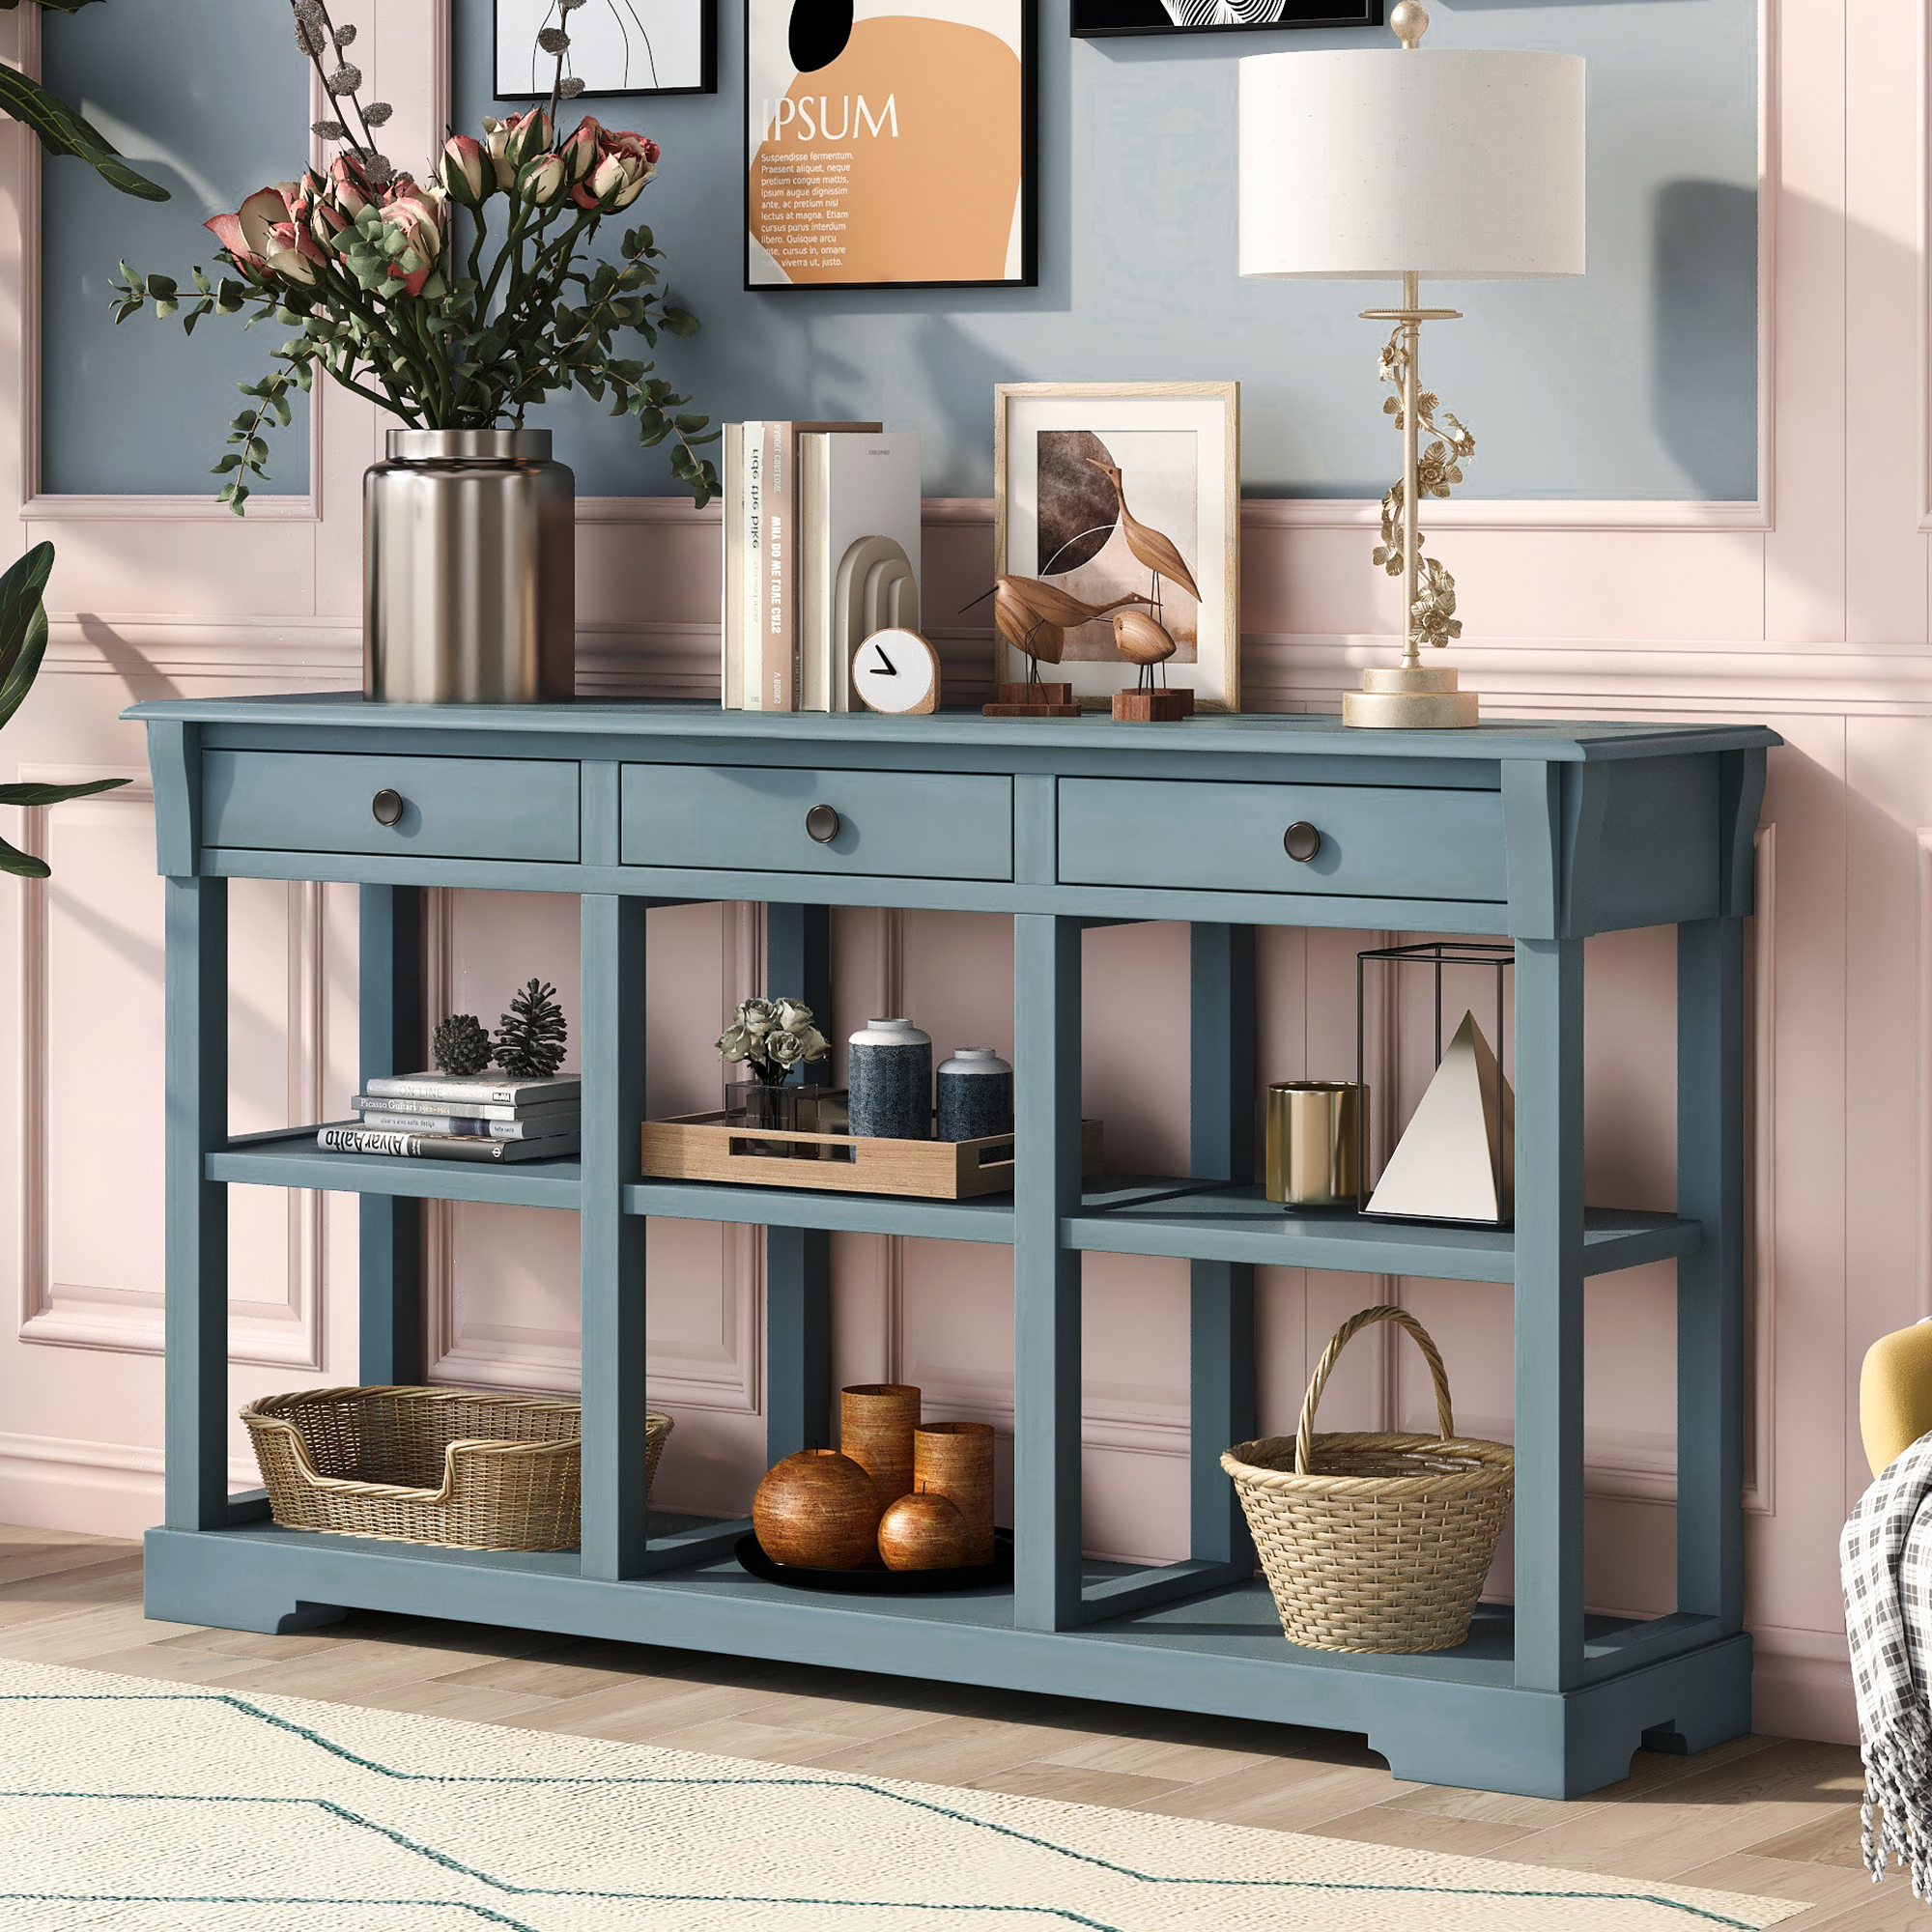 Retro Console Table With Ample Storage, Open Shelves And Drawers - WF284982AAM